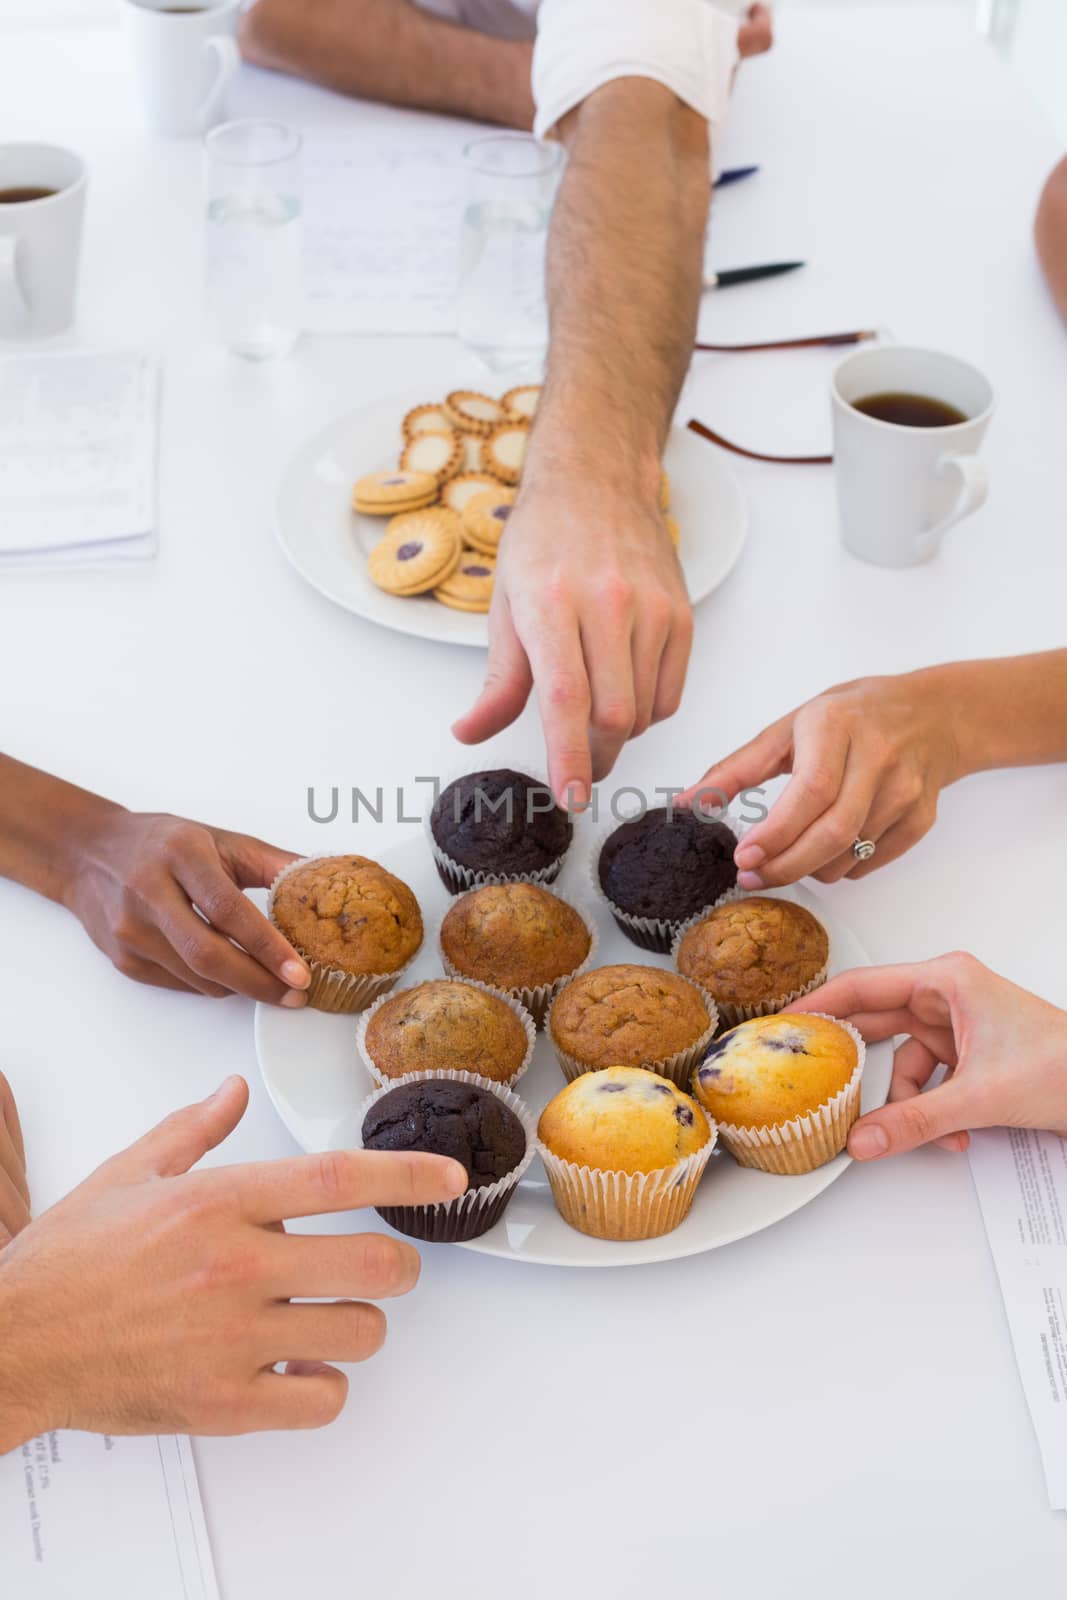 Business people taking muffins from plate in the office